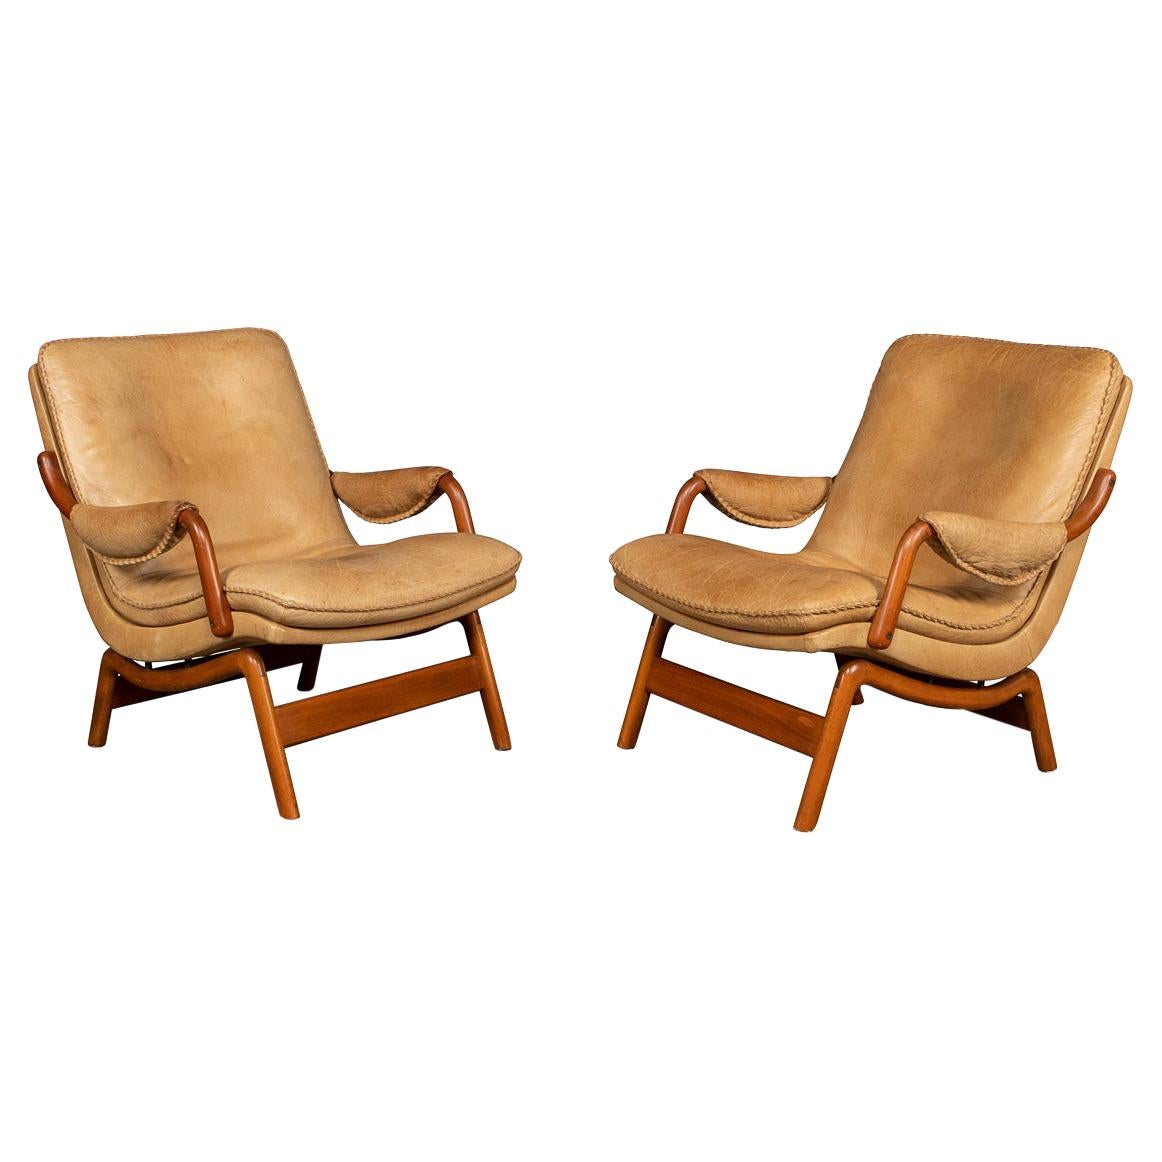 20th Century Pair of Ikea Leather & Teak Chairs, 1960s